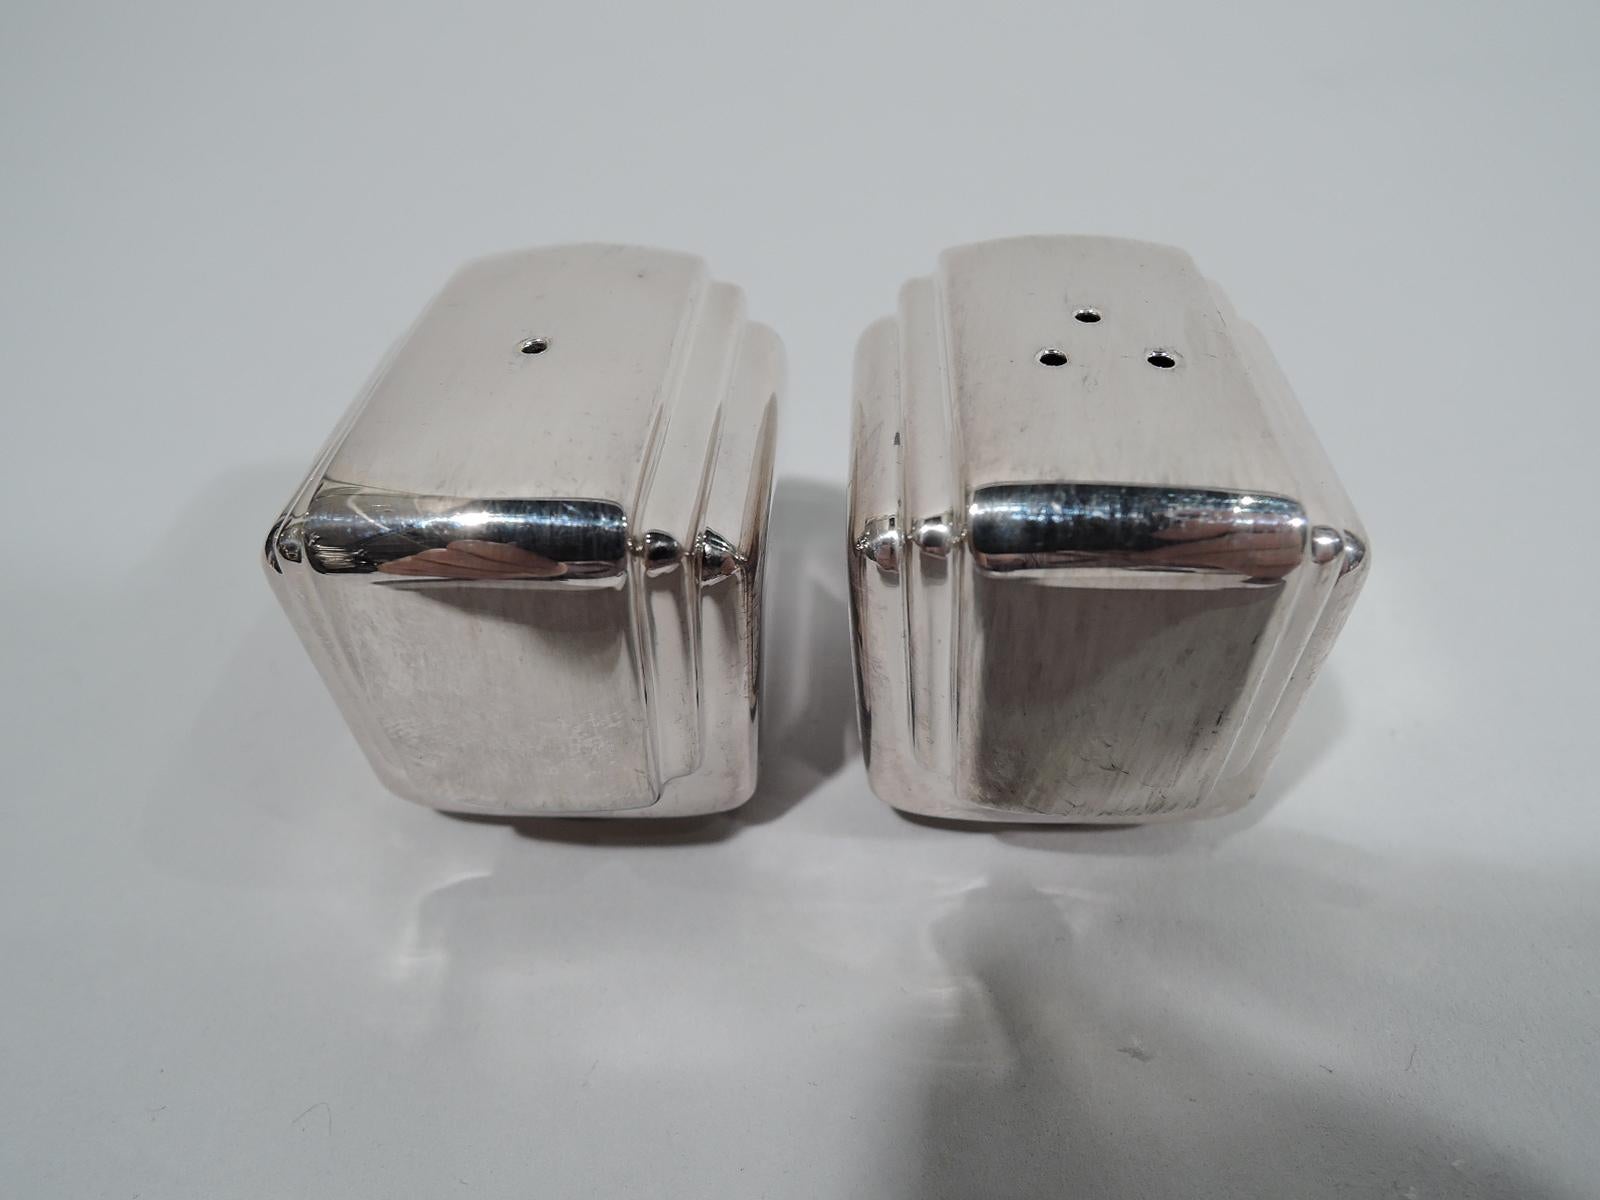 American Modern sterling silver salt and pepper shakers. Retailed by Tiffany & Co. in New York. Each: Rectangular with stepped sides and round and threaded foot. Marked “925” with retailer’s stamp. Total weight: 3 troy ounces.